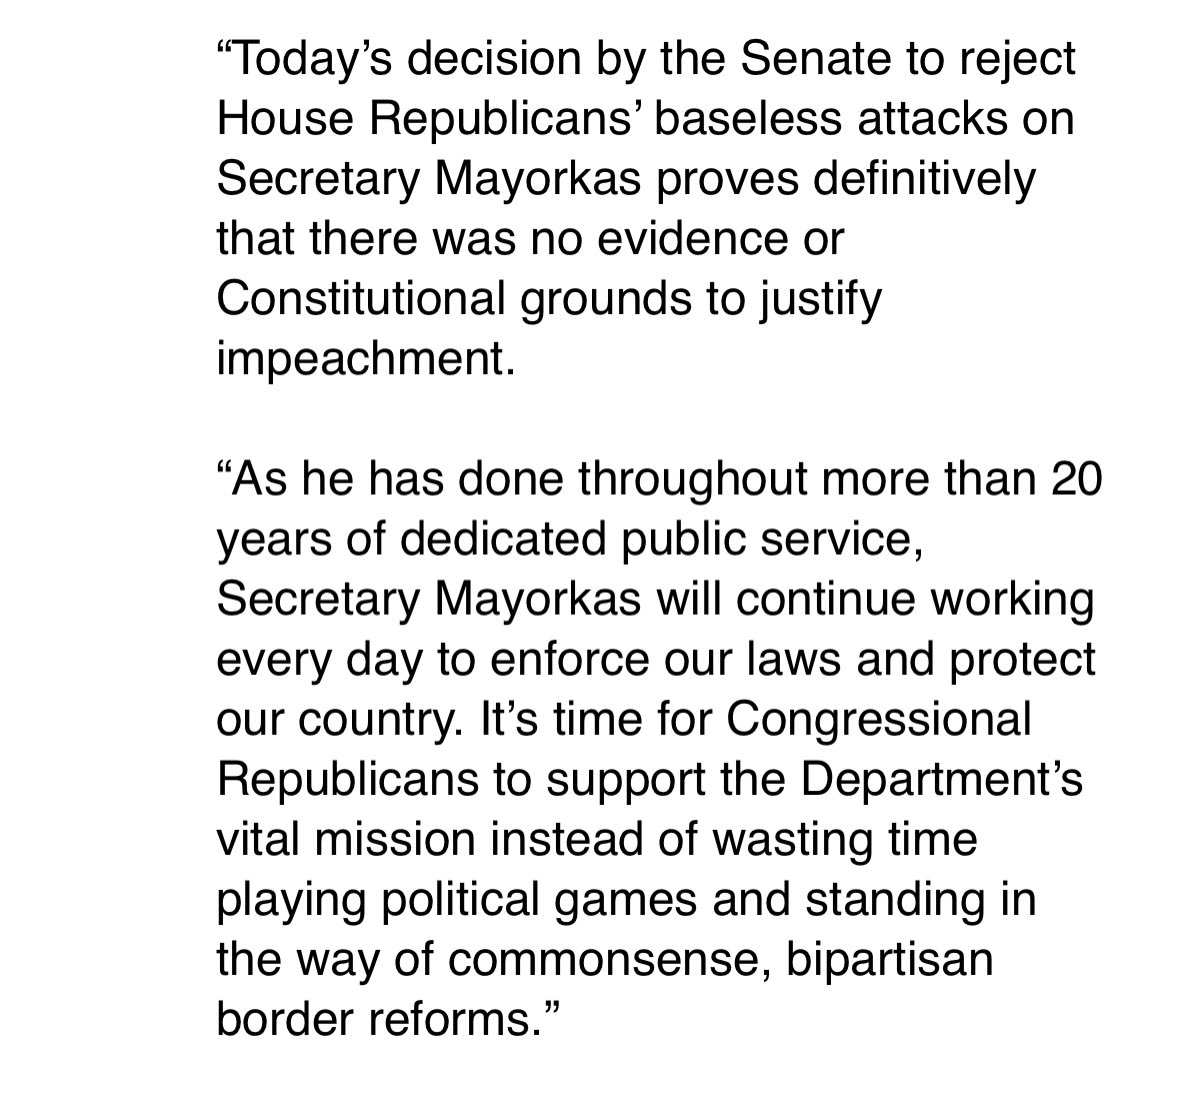 DHS out with its statement. Says Senate vote “definitively that there was no evidence or Constitutional grounds to justify impeachment.”